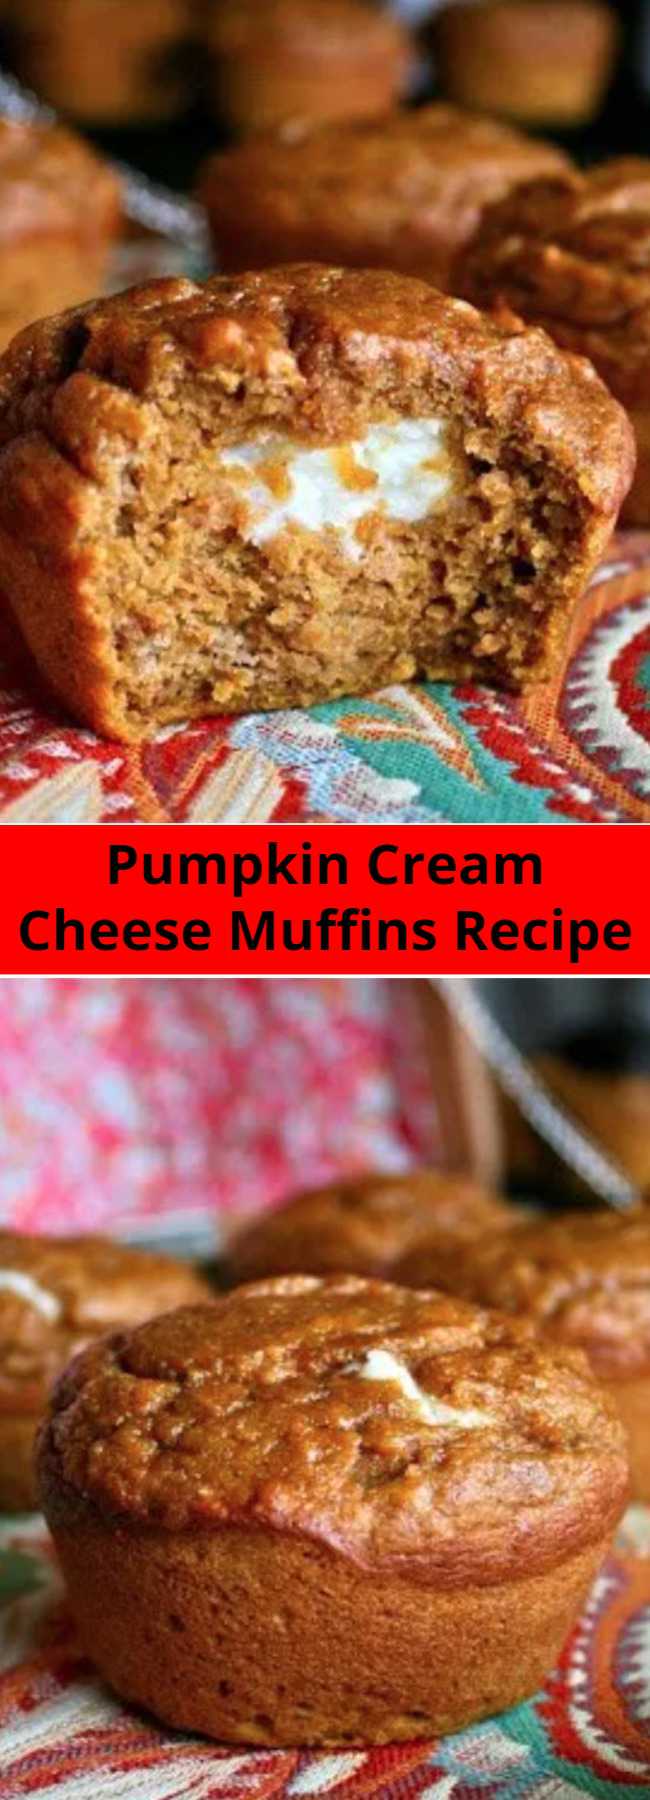 Pumpkin Cream Cheese Muffins Recipe - These Pumpkin Cream Cheese Muffins are a perfect Starbucks knock off and they are sure to satisfy all your pumpkin dreams. It's amazingly light, moist, and flavorful so I will definitely be keeping this recipe for my go to pumpkin bread/muffin. In my opinion, these are best served slightly warmed and with a cup of hot coffee, which actually sounds pretty great right now. 🙂 Enjoy!